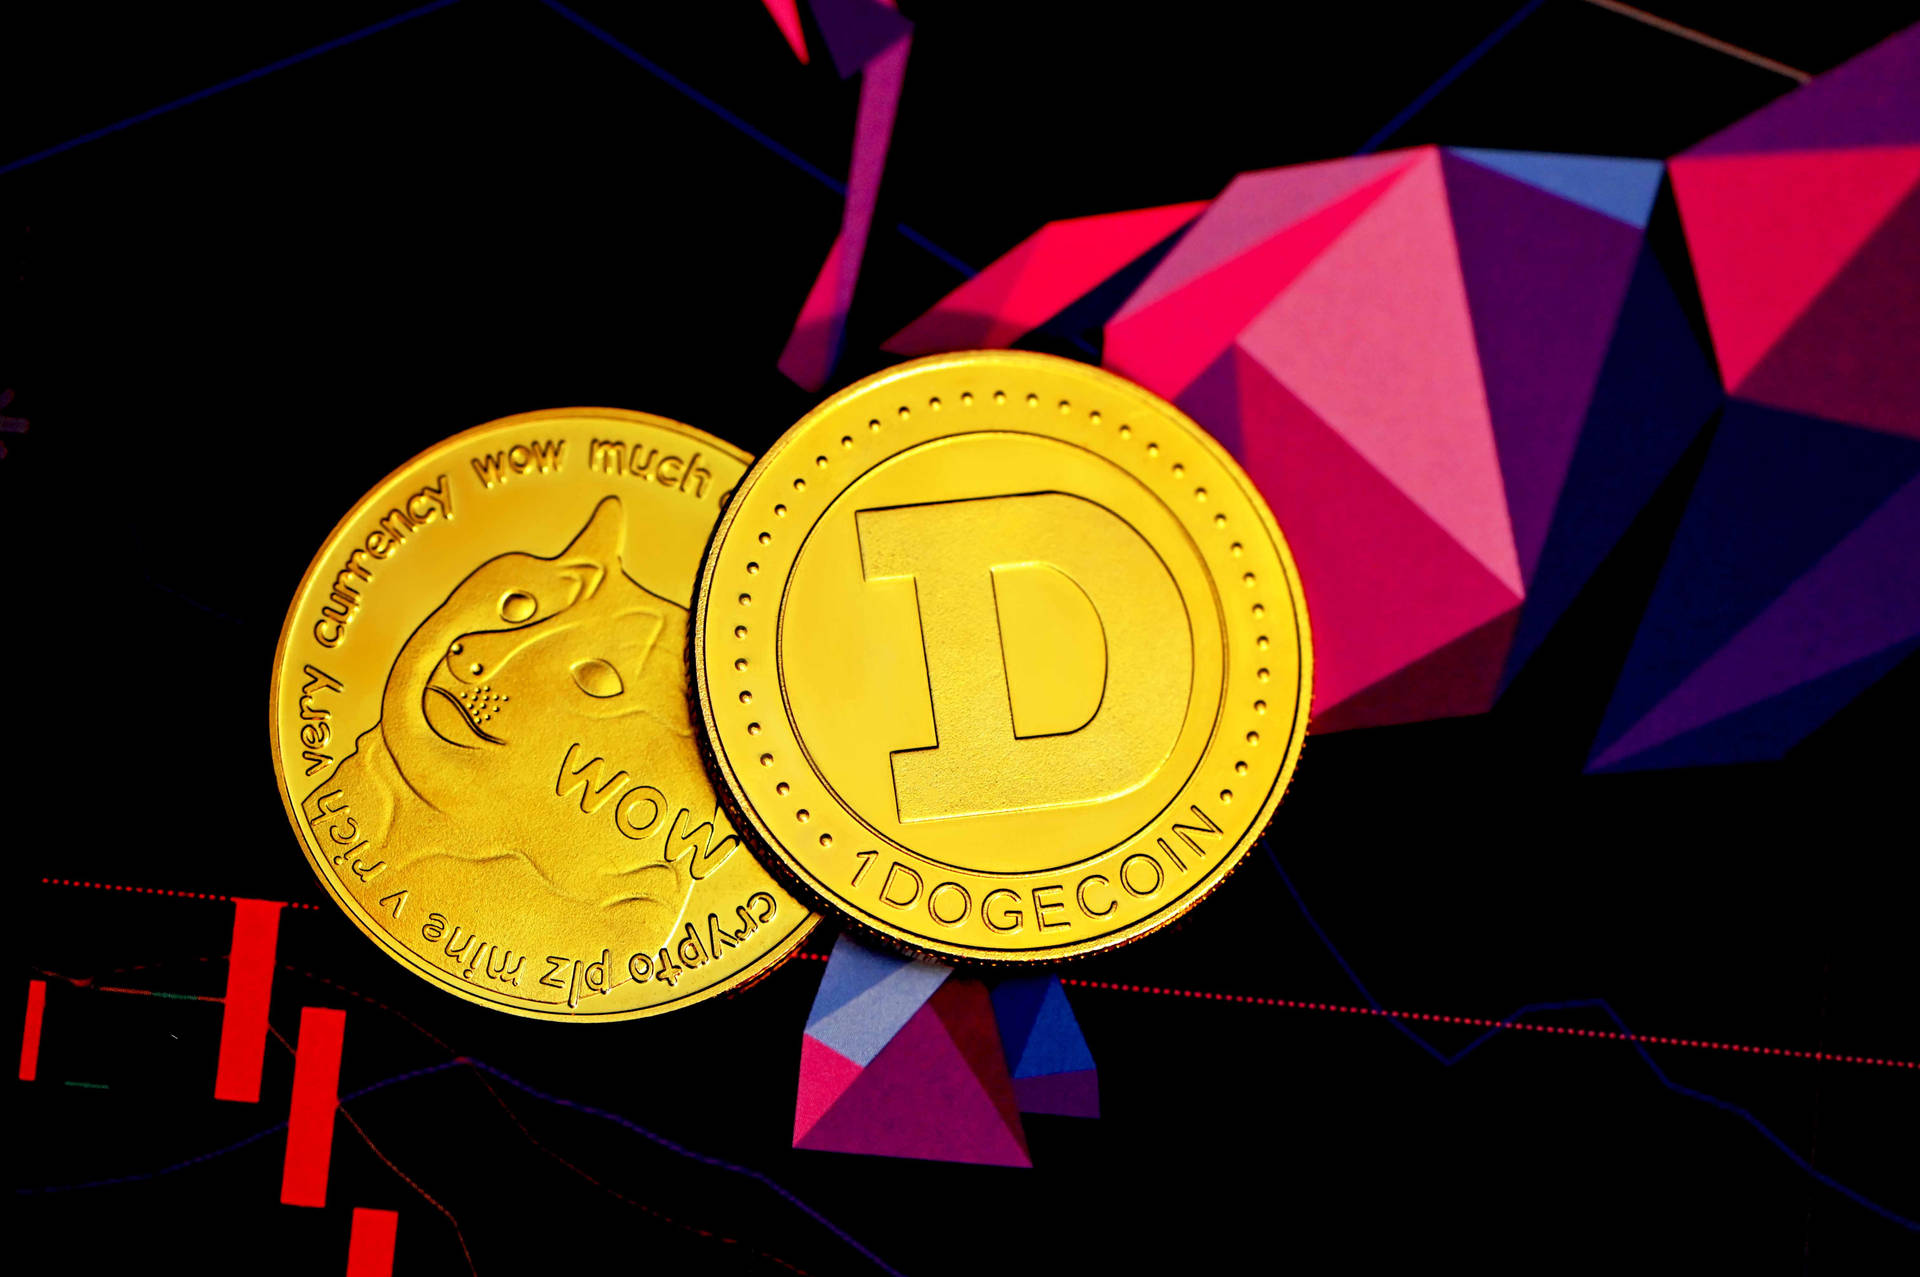 Dogecoin Soaring High - Cryptocurrency Evolution Wallpaper